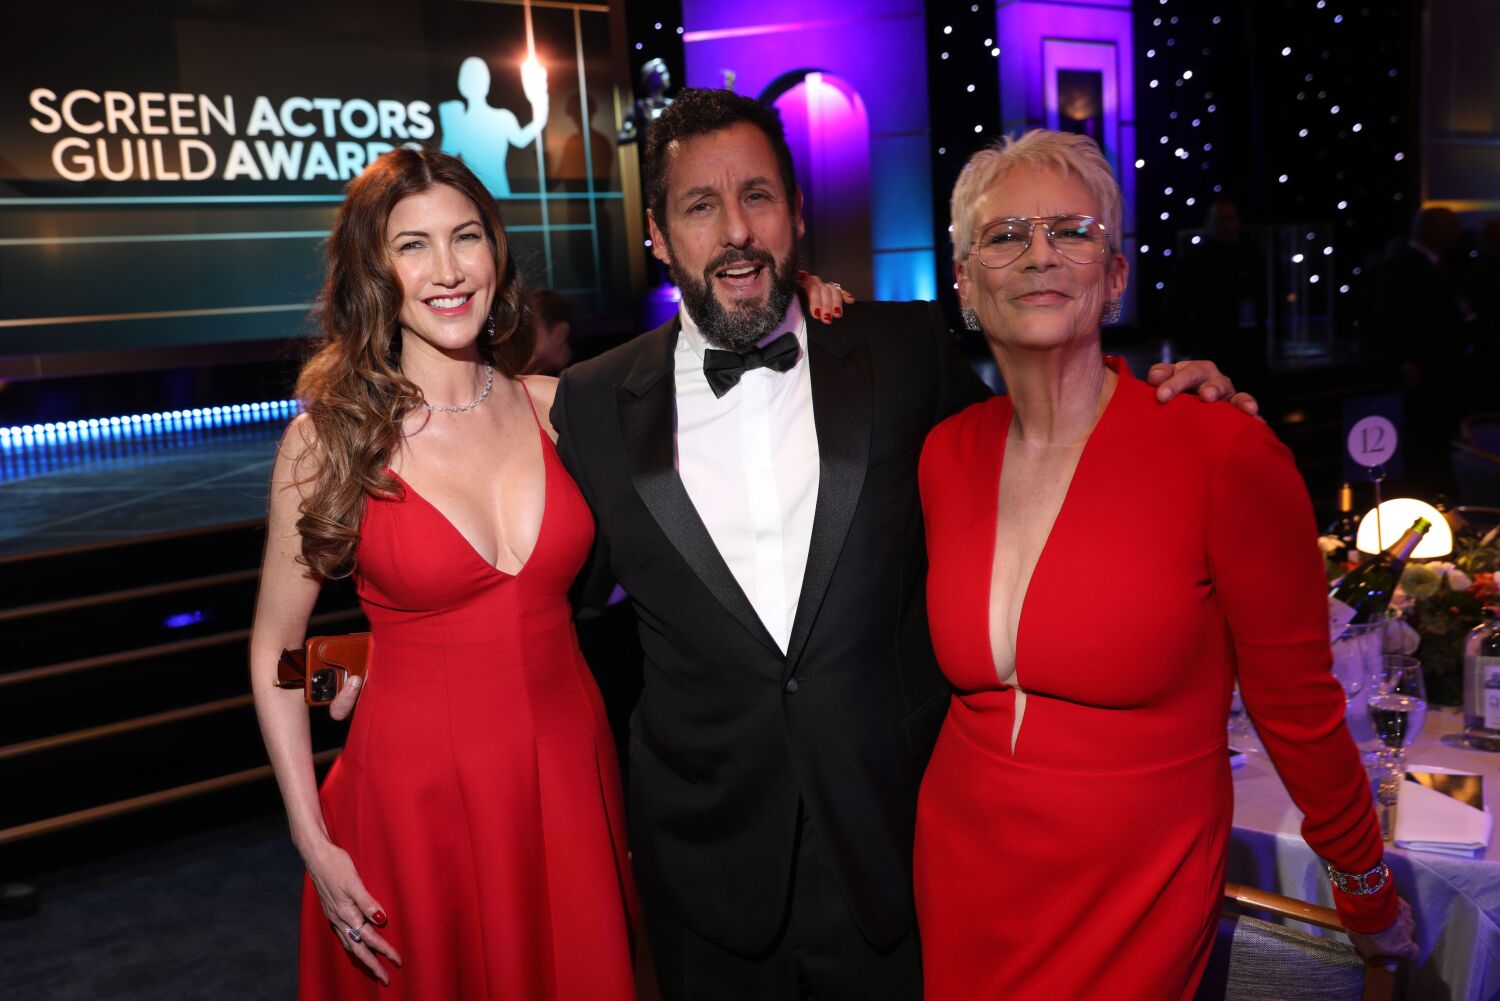 'Surreal' scenes and unguarded moments from the SAG Awards party